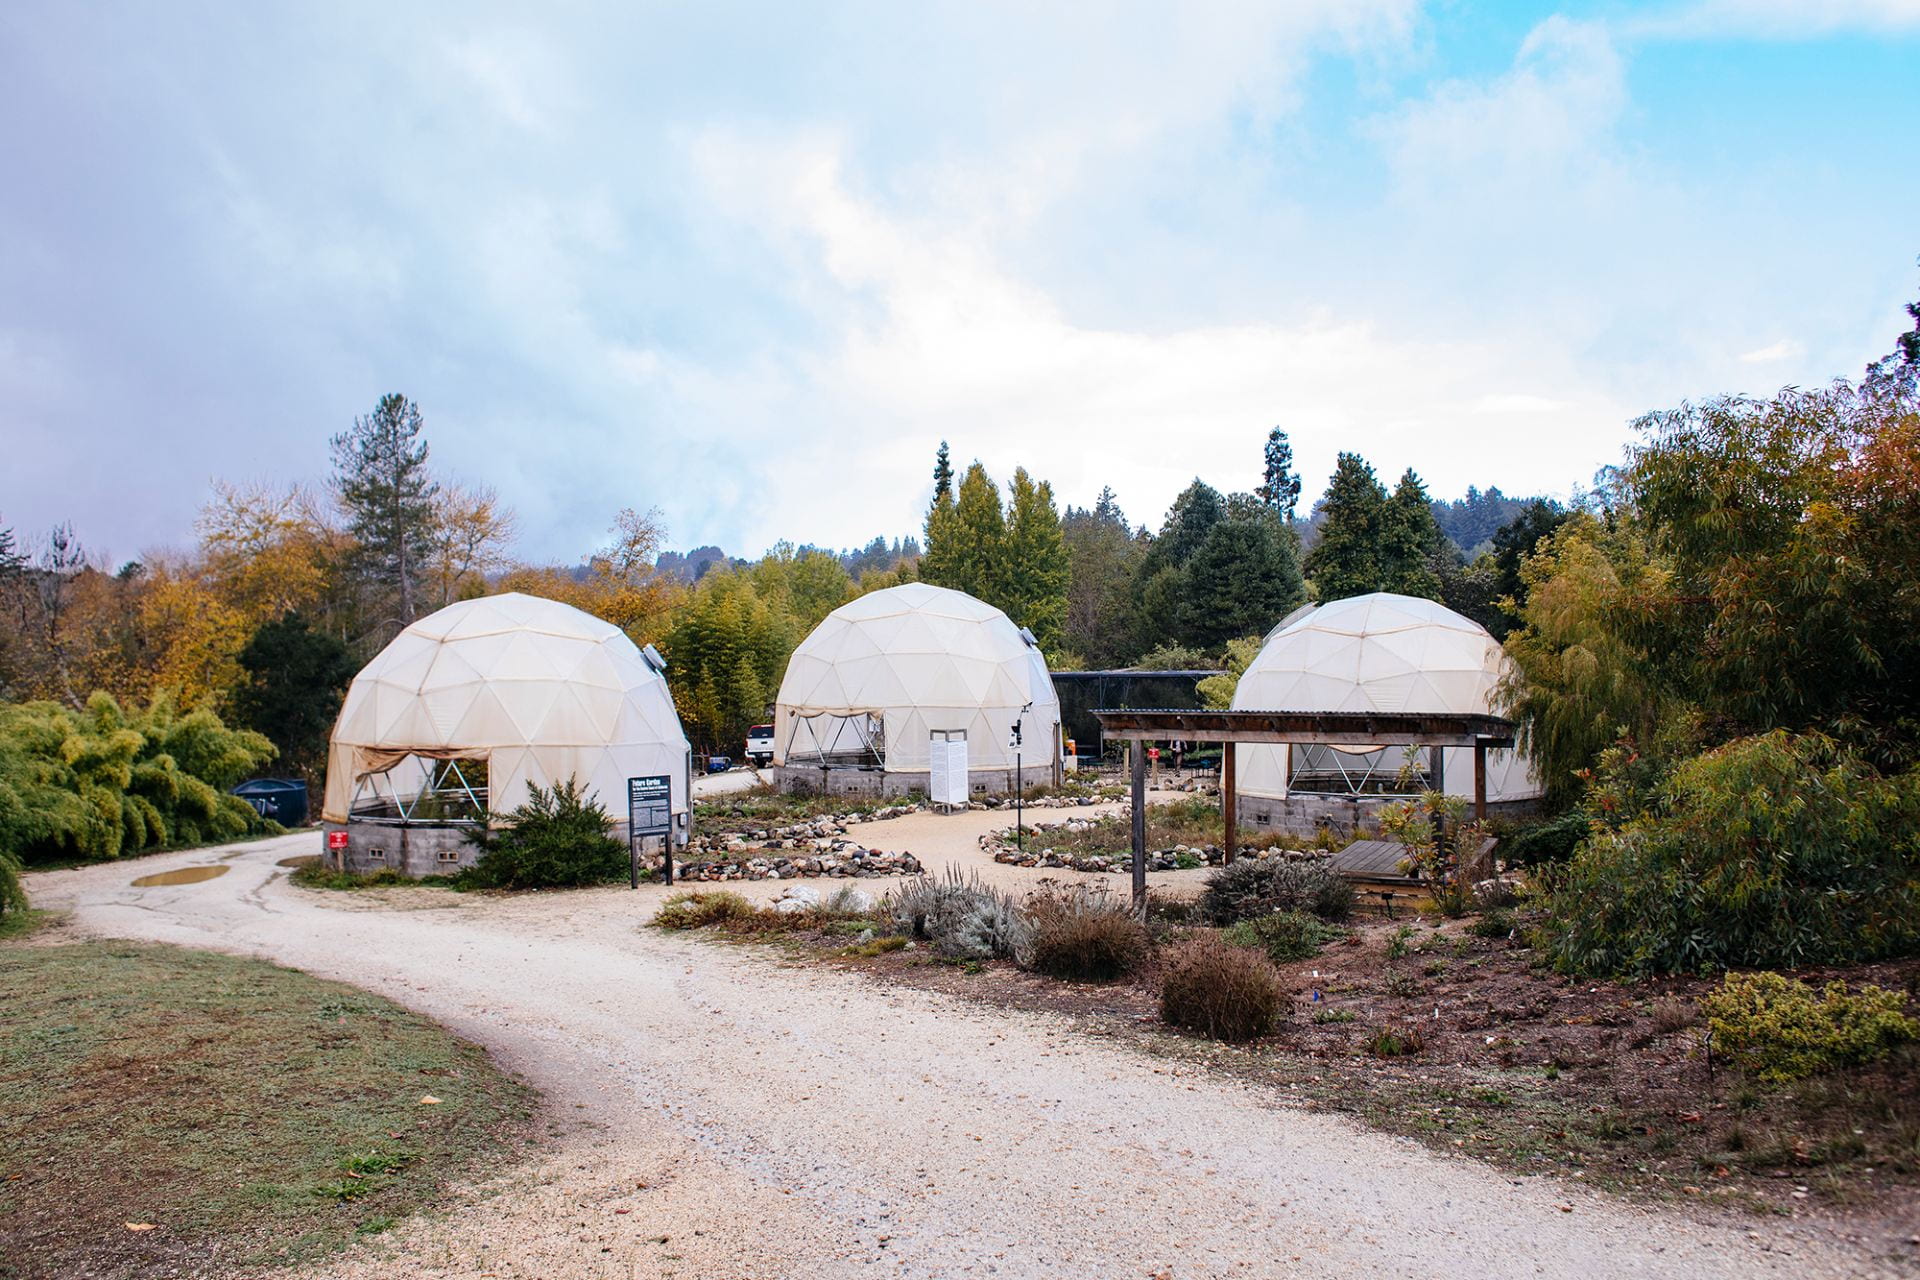 3 geodesic domes that are home to experimental gardens